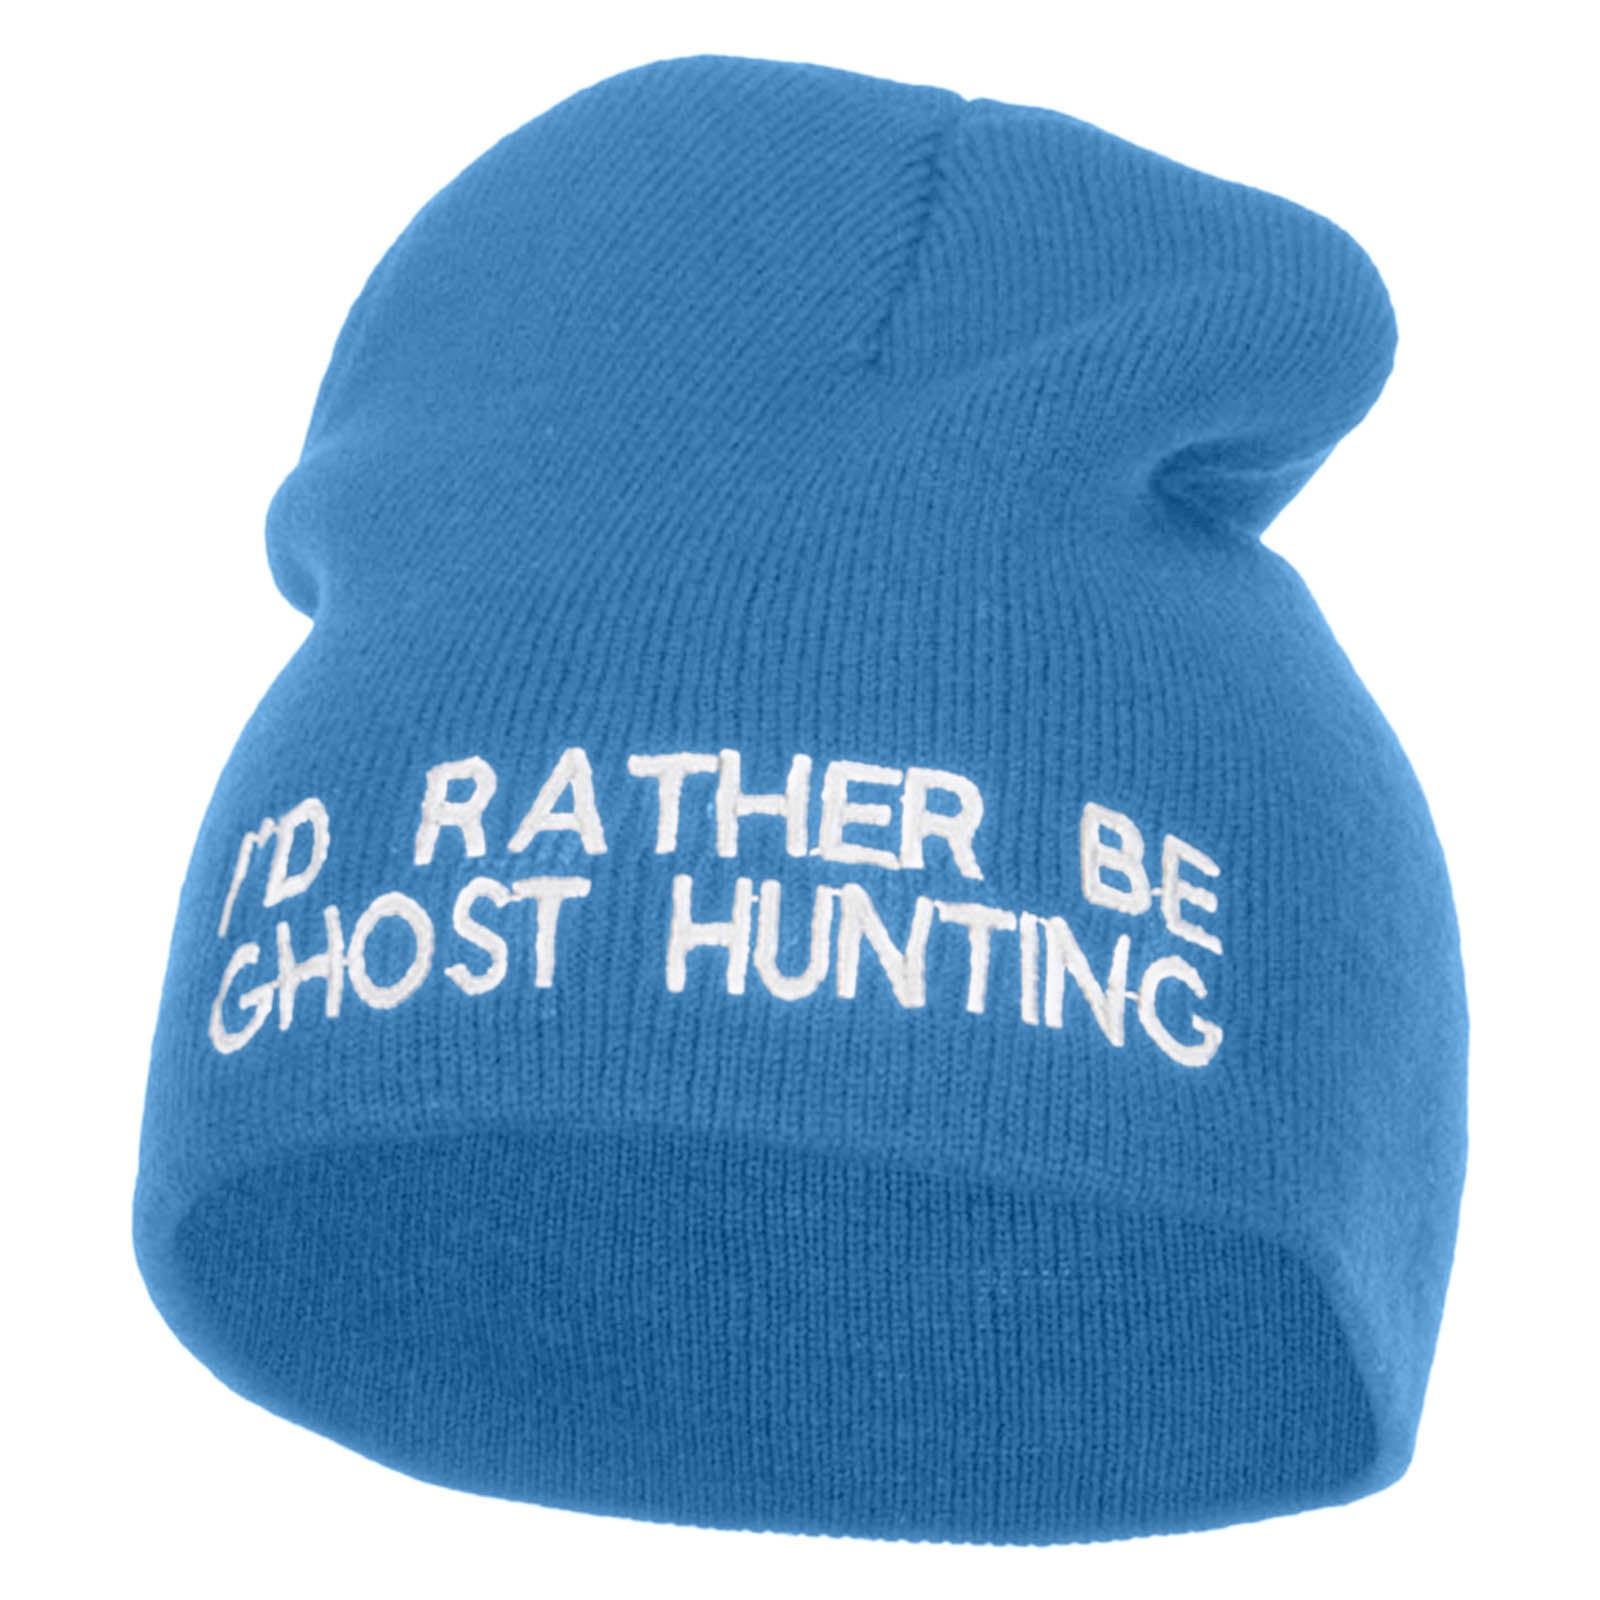 I&#039;d Rather Be Ghost Hunting Short Beanie - Sky Blue OSFM